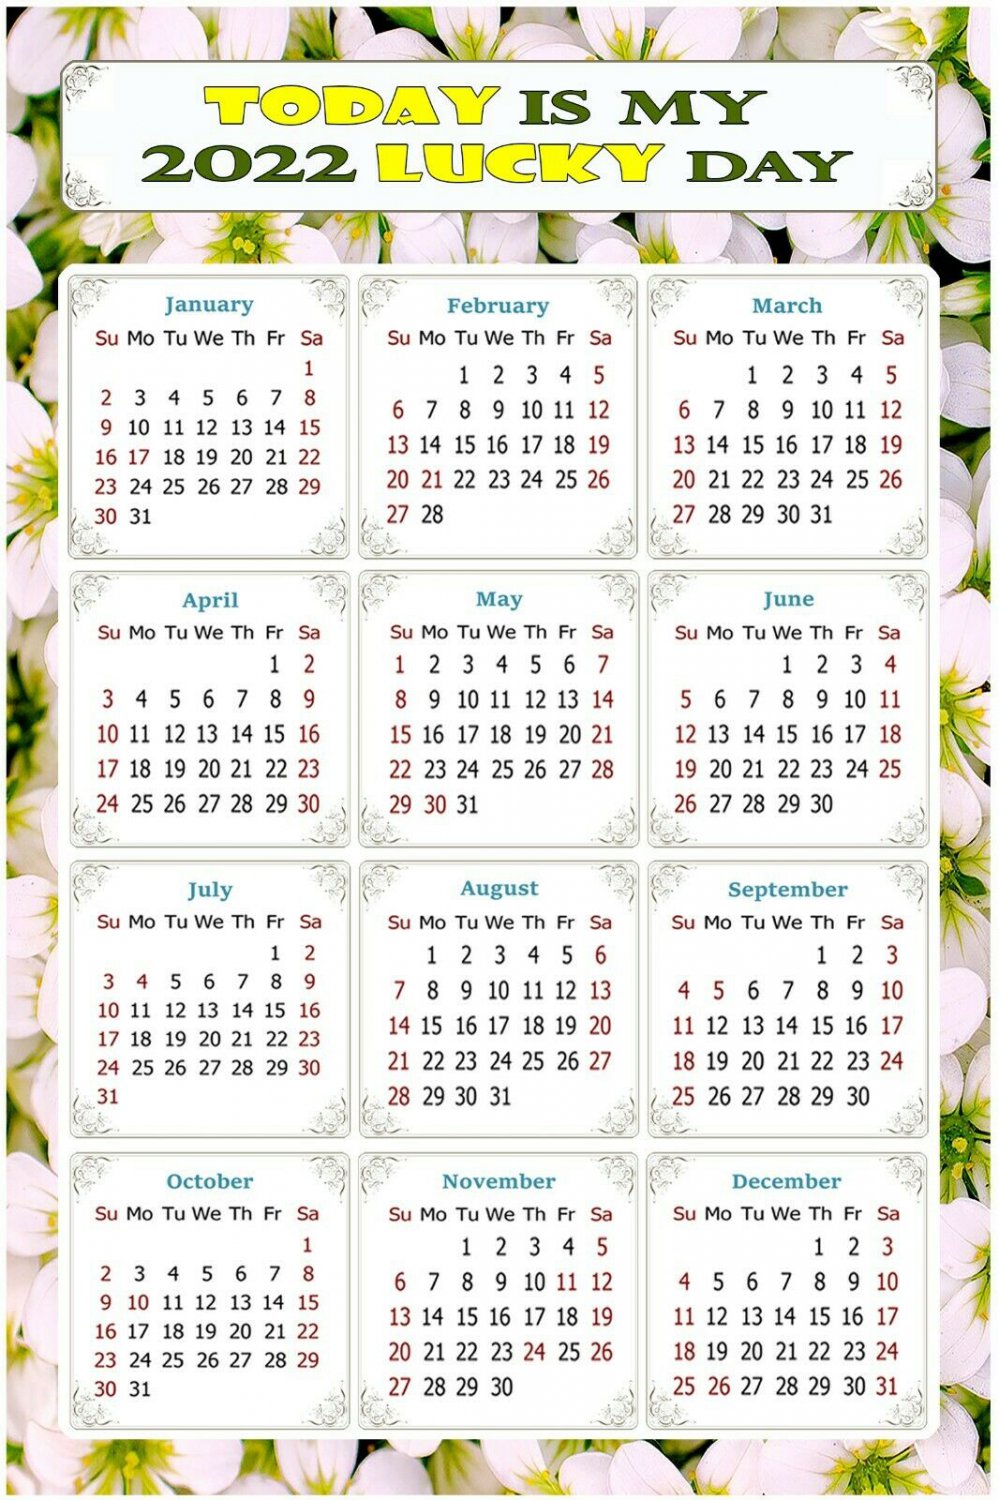 2022 Magnetic Calendar - Today is My Lucky Day - Themed 029 (5,25 x 8)